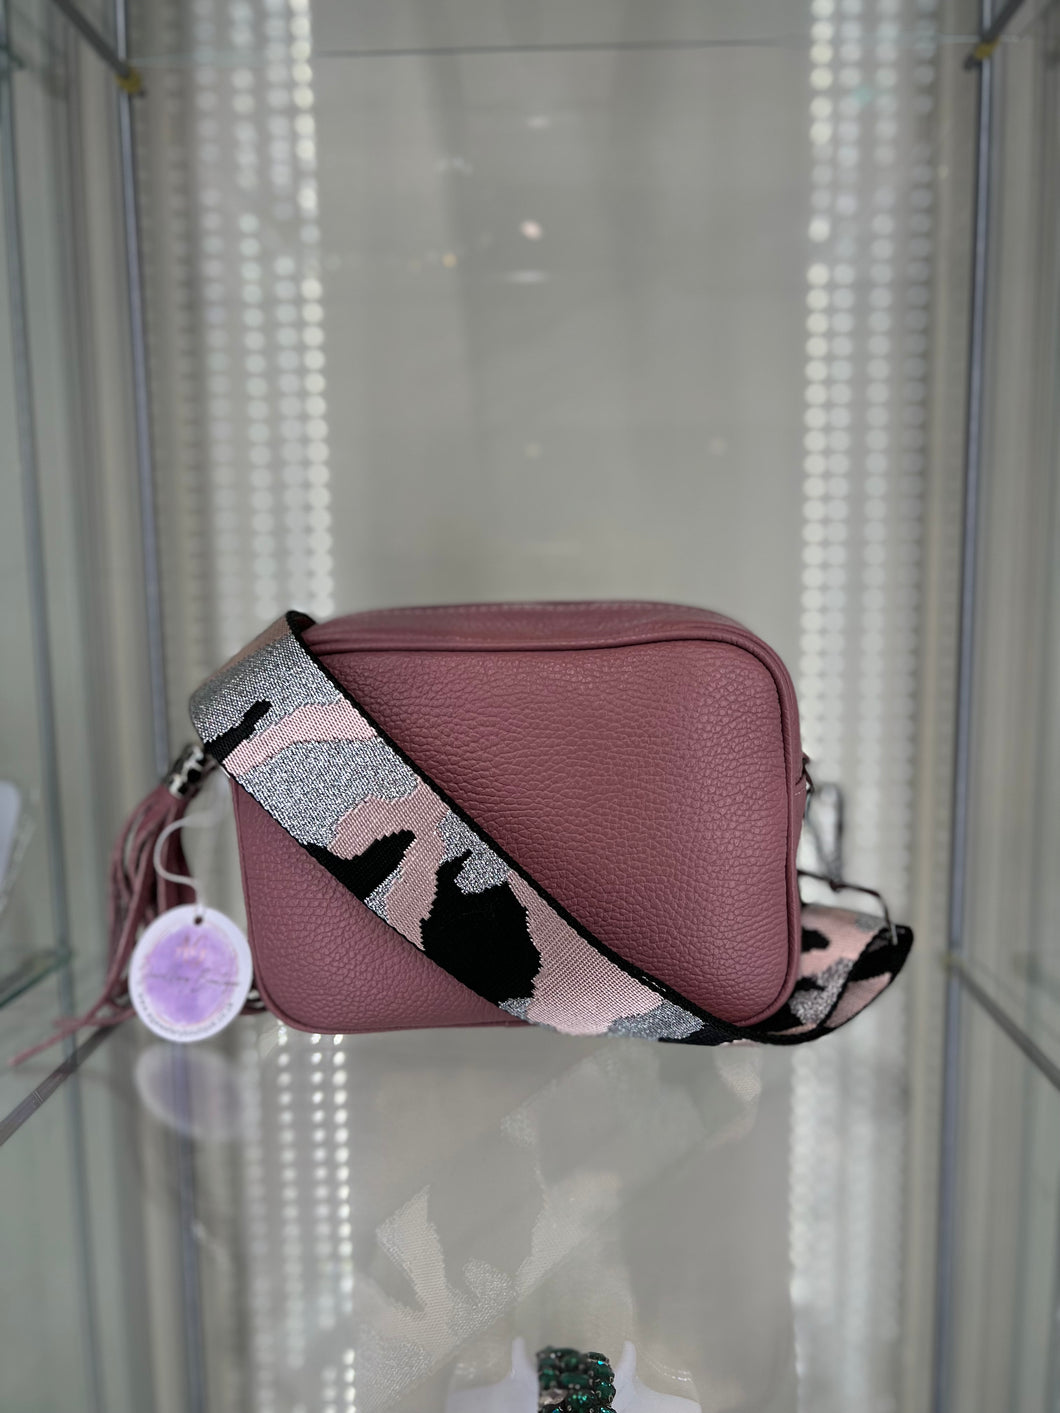 Real Leather Pink Crossbody bag with Camo print Strap